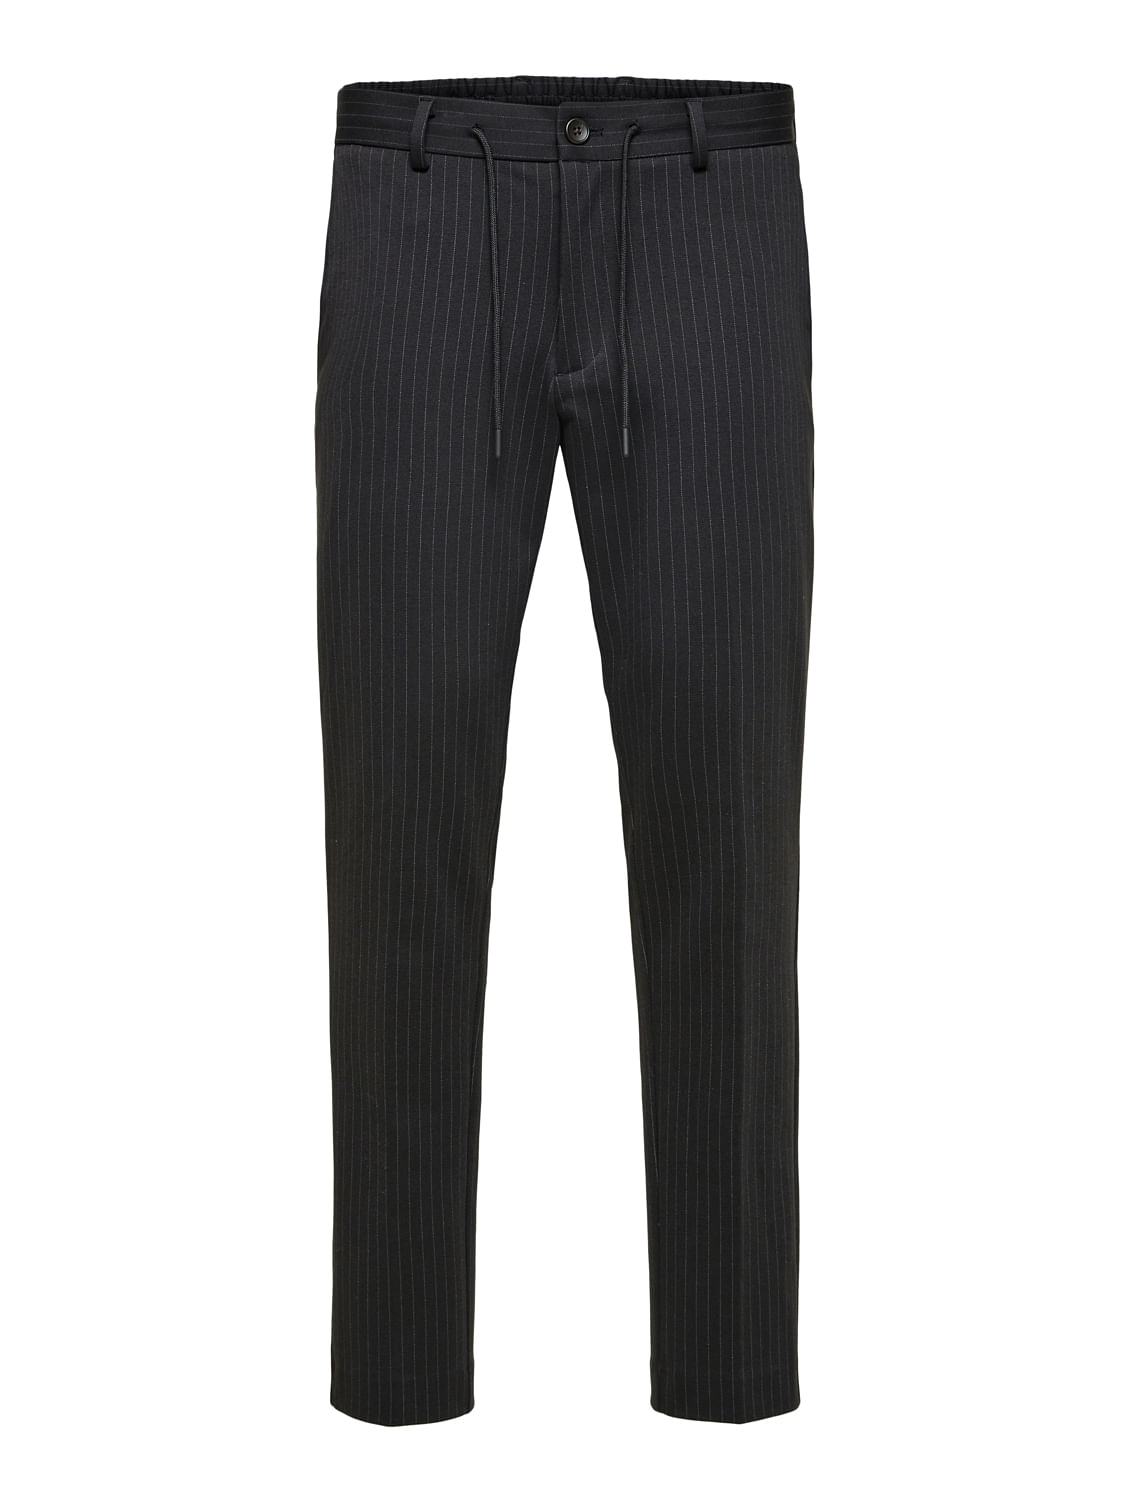 Summer Thin Striped Suit Pants Men Slim Gray Black Dress Pants Business  Formal Trousers for Male